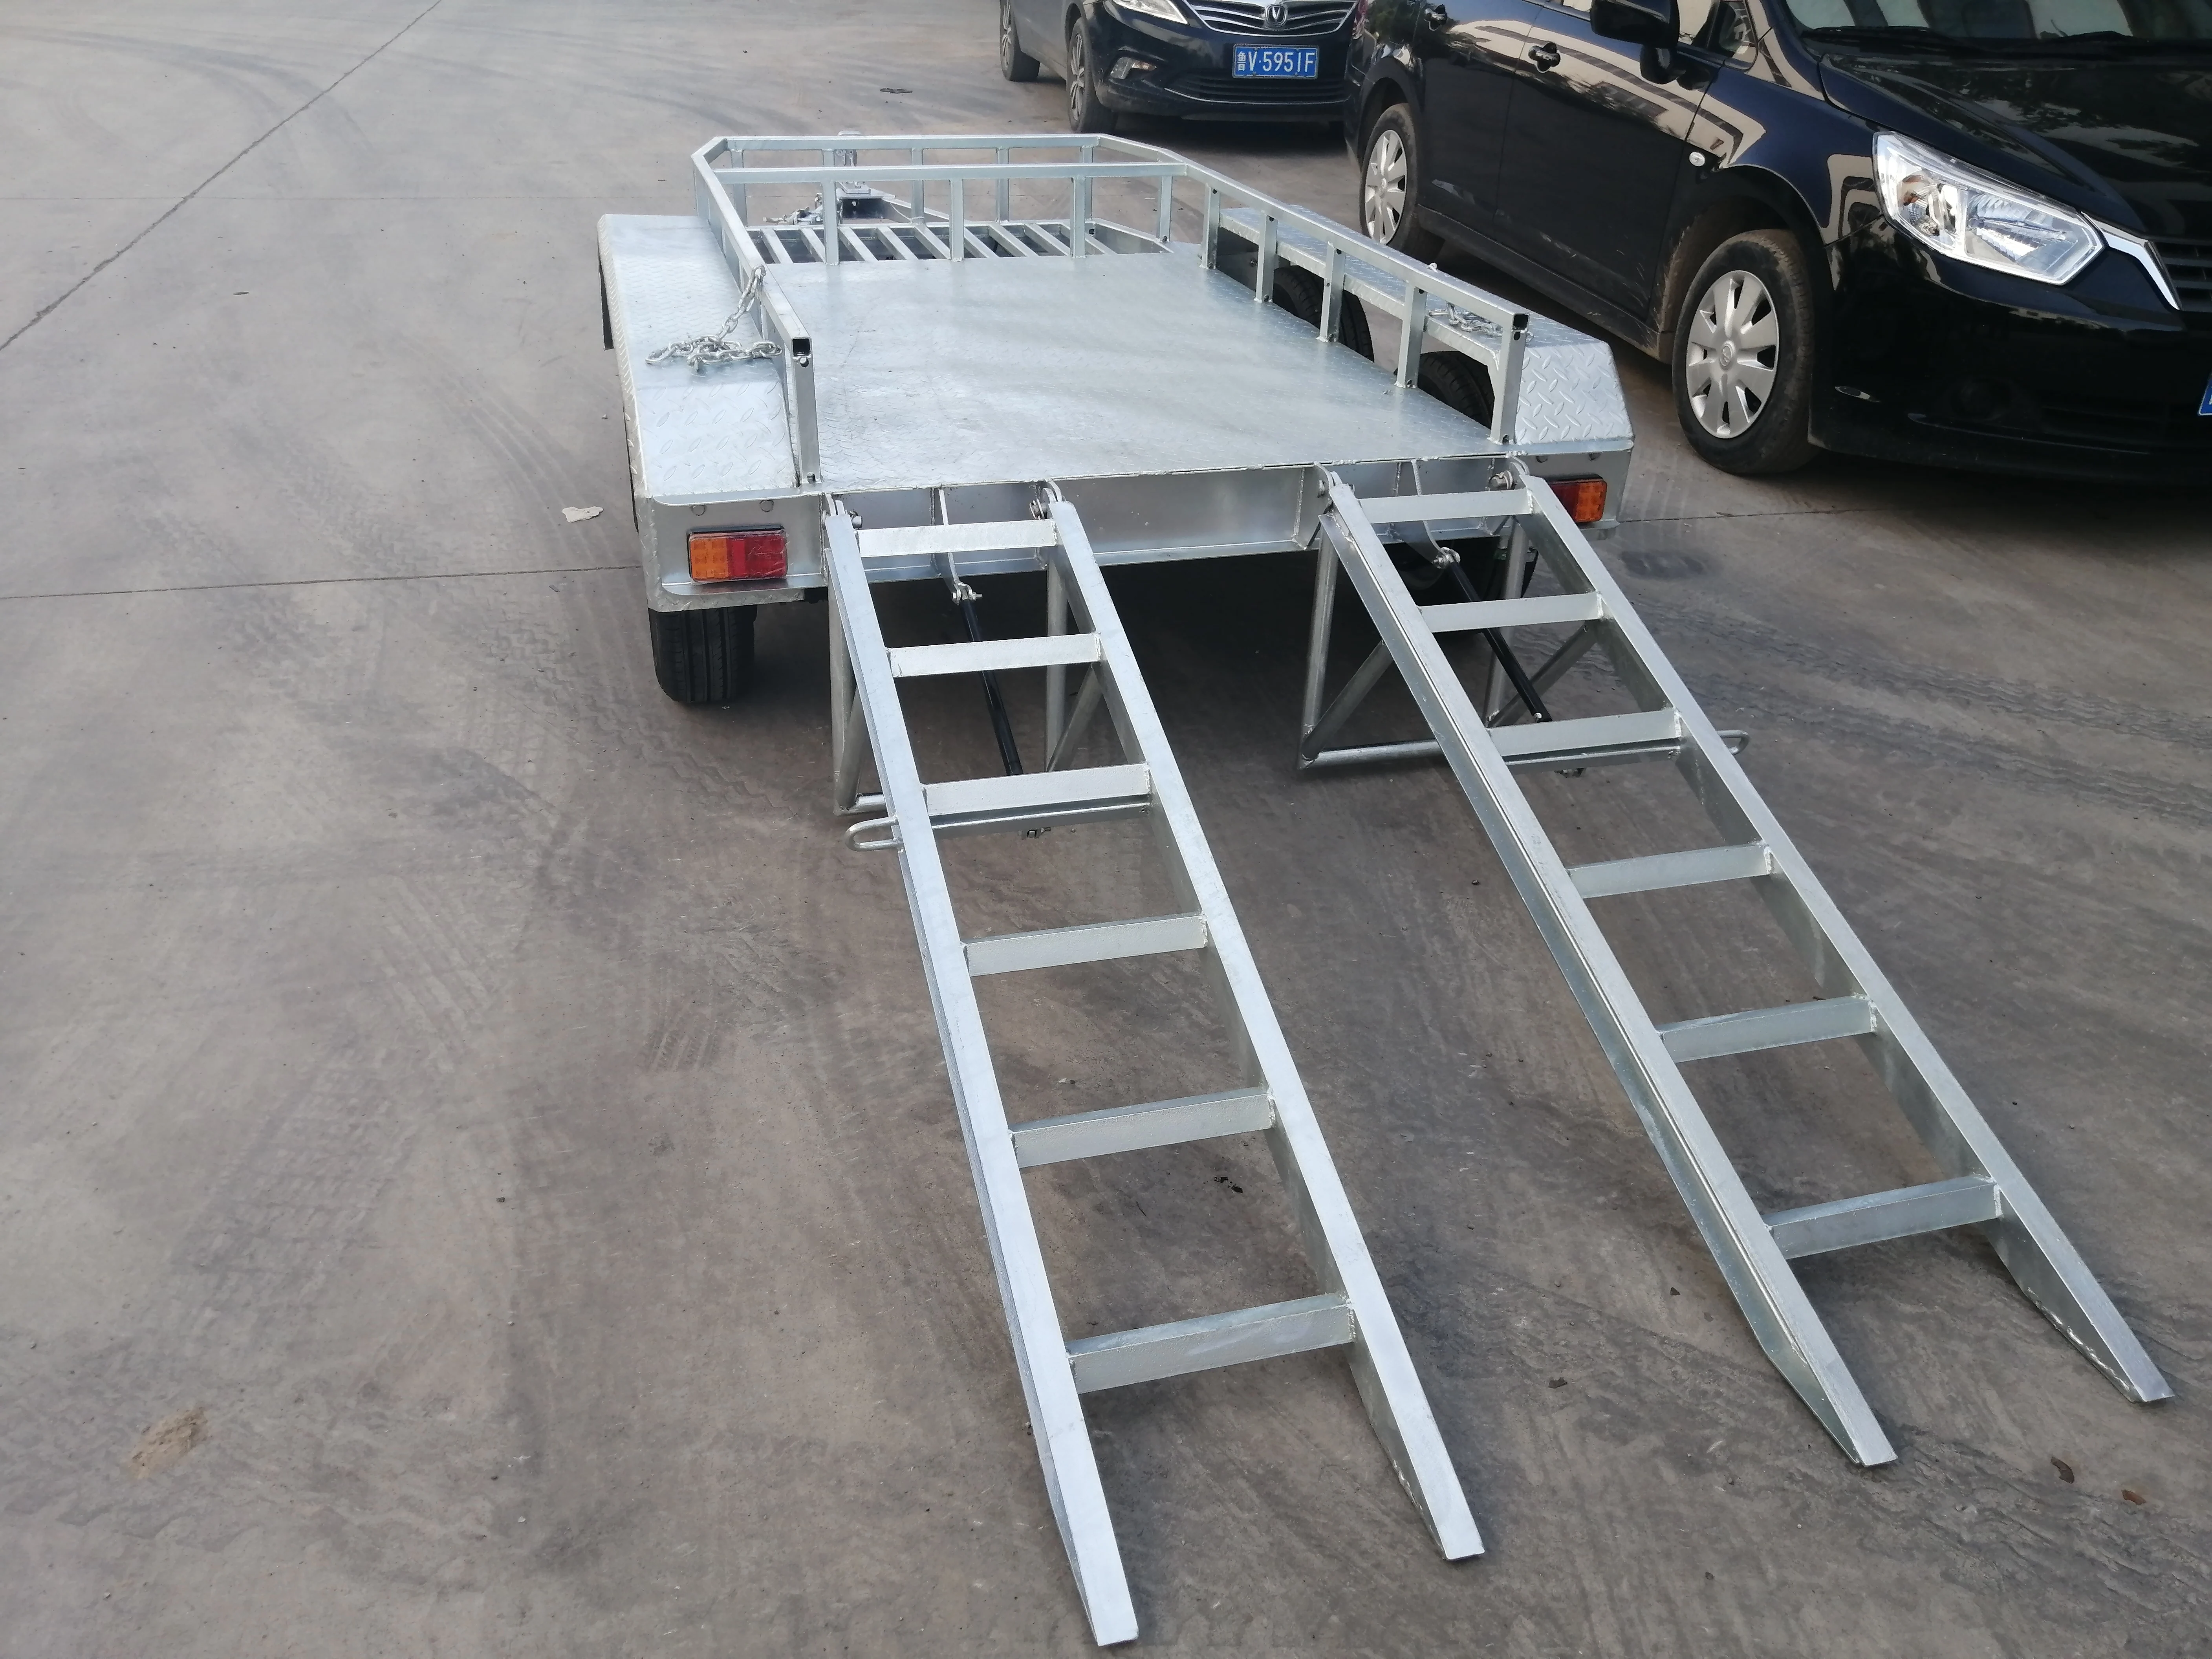 
High quality small mini excavator full steel trailer truck trailer vehicle for truck 